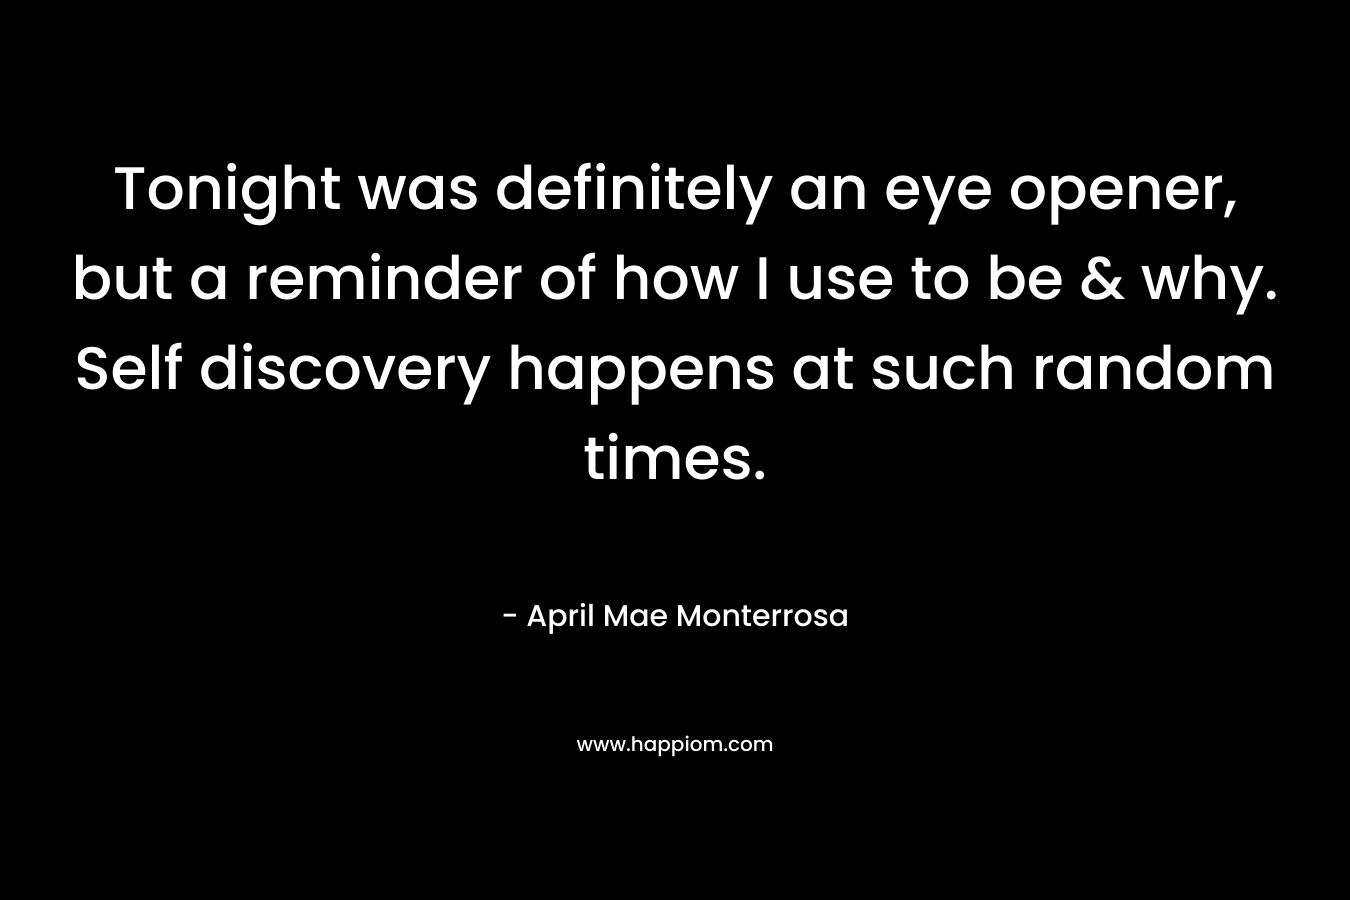 Tonight was definitely an eye opener, but a reminder of how I use to be & why. Self discovery happens at such random times. – April Mae Monterrosa